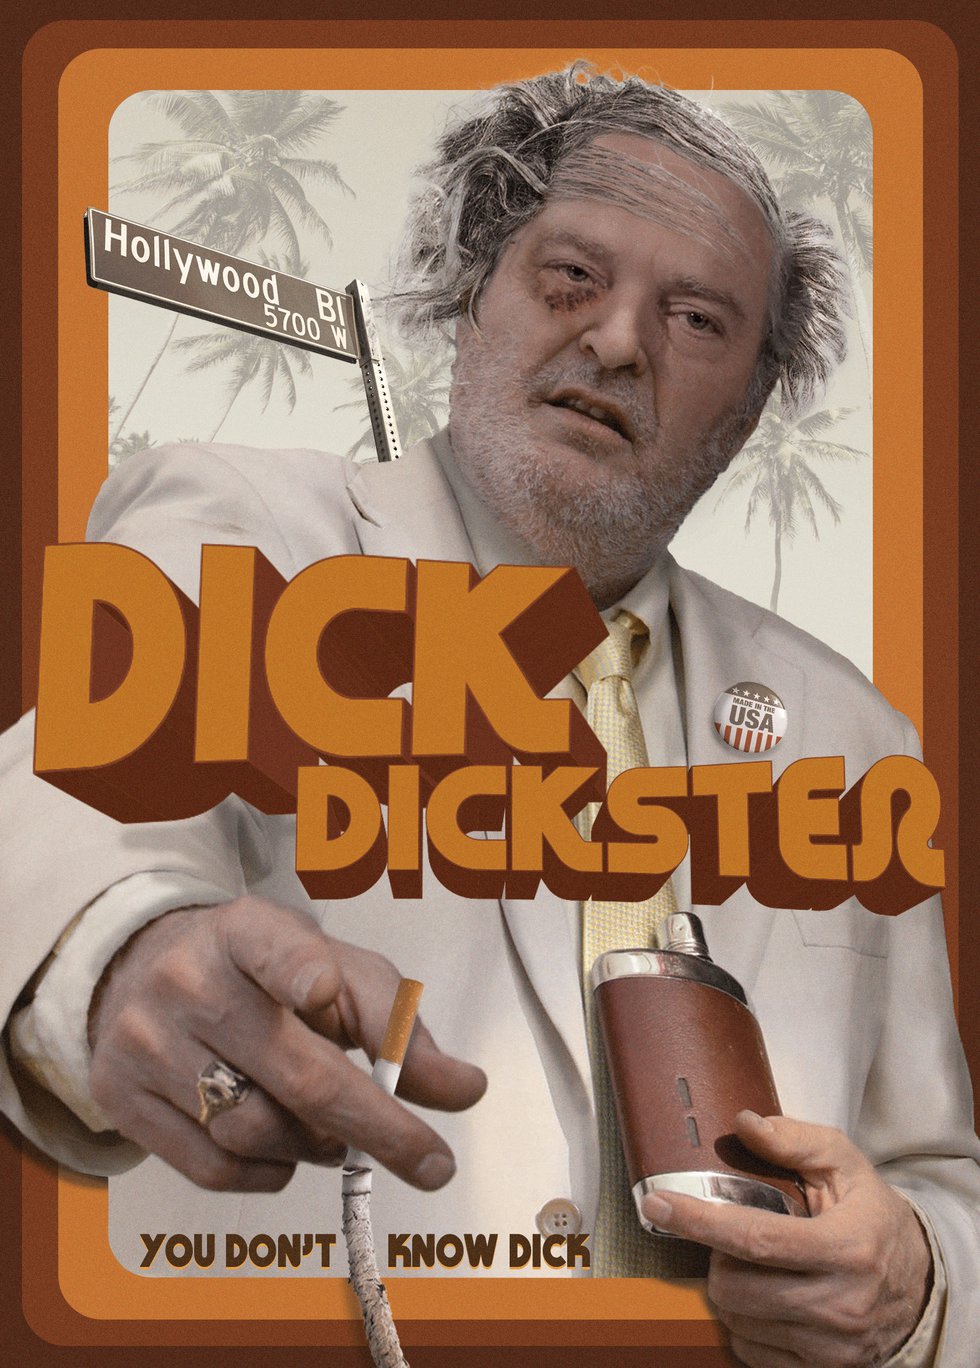 They Want Dick Dickster Comedy Film